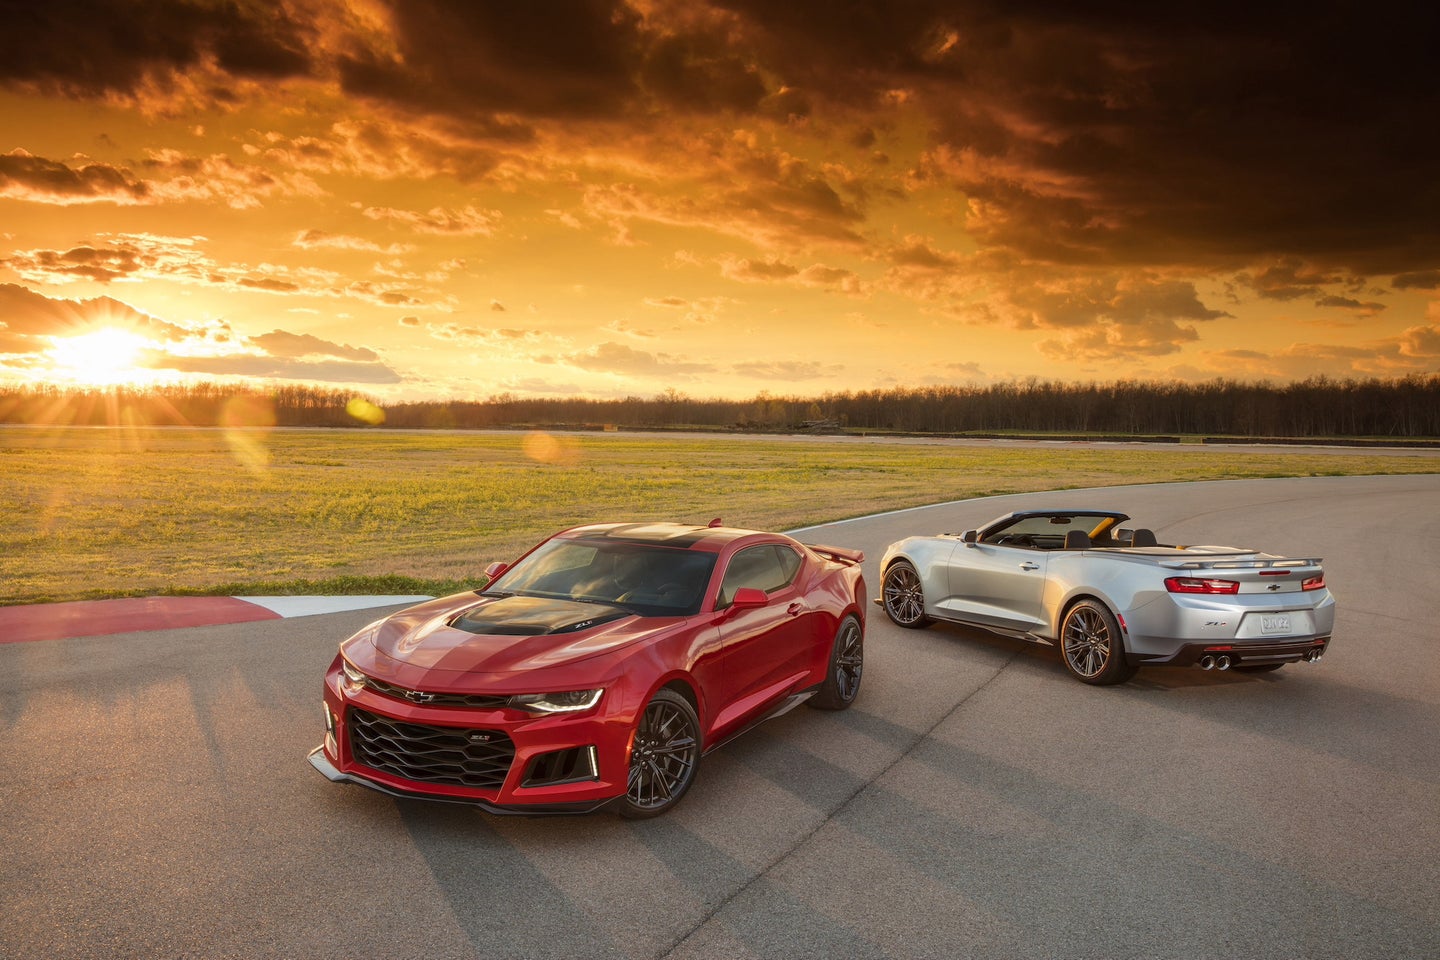 The 2018 Chevy Camaro. On the left, a coupe. On the right, a convertible. 